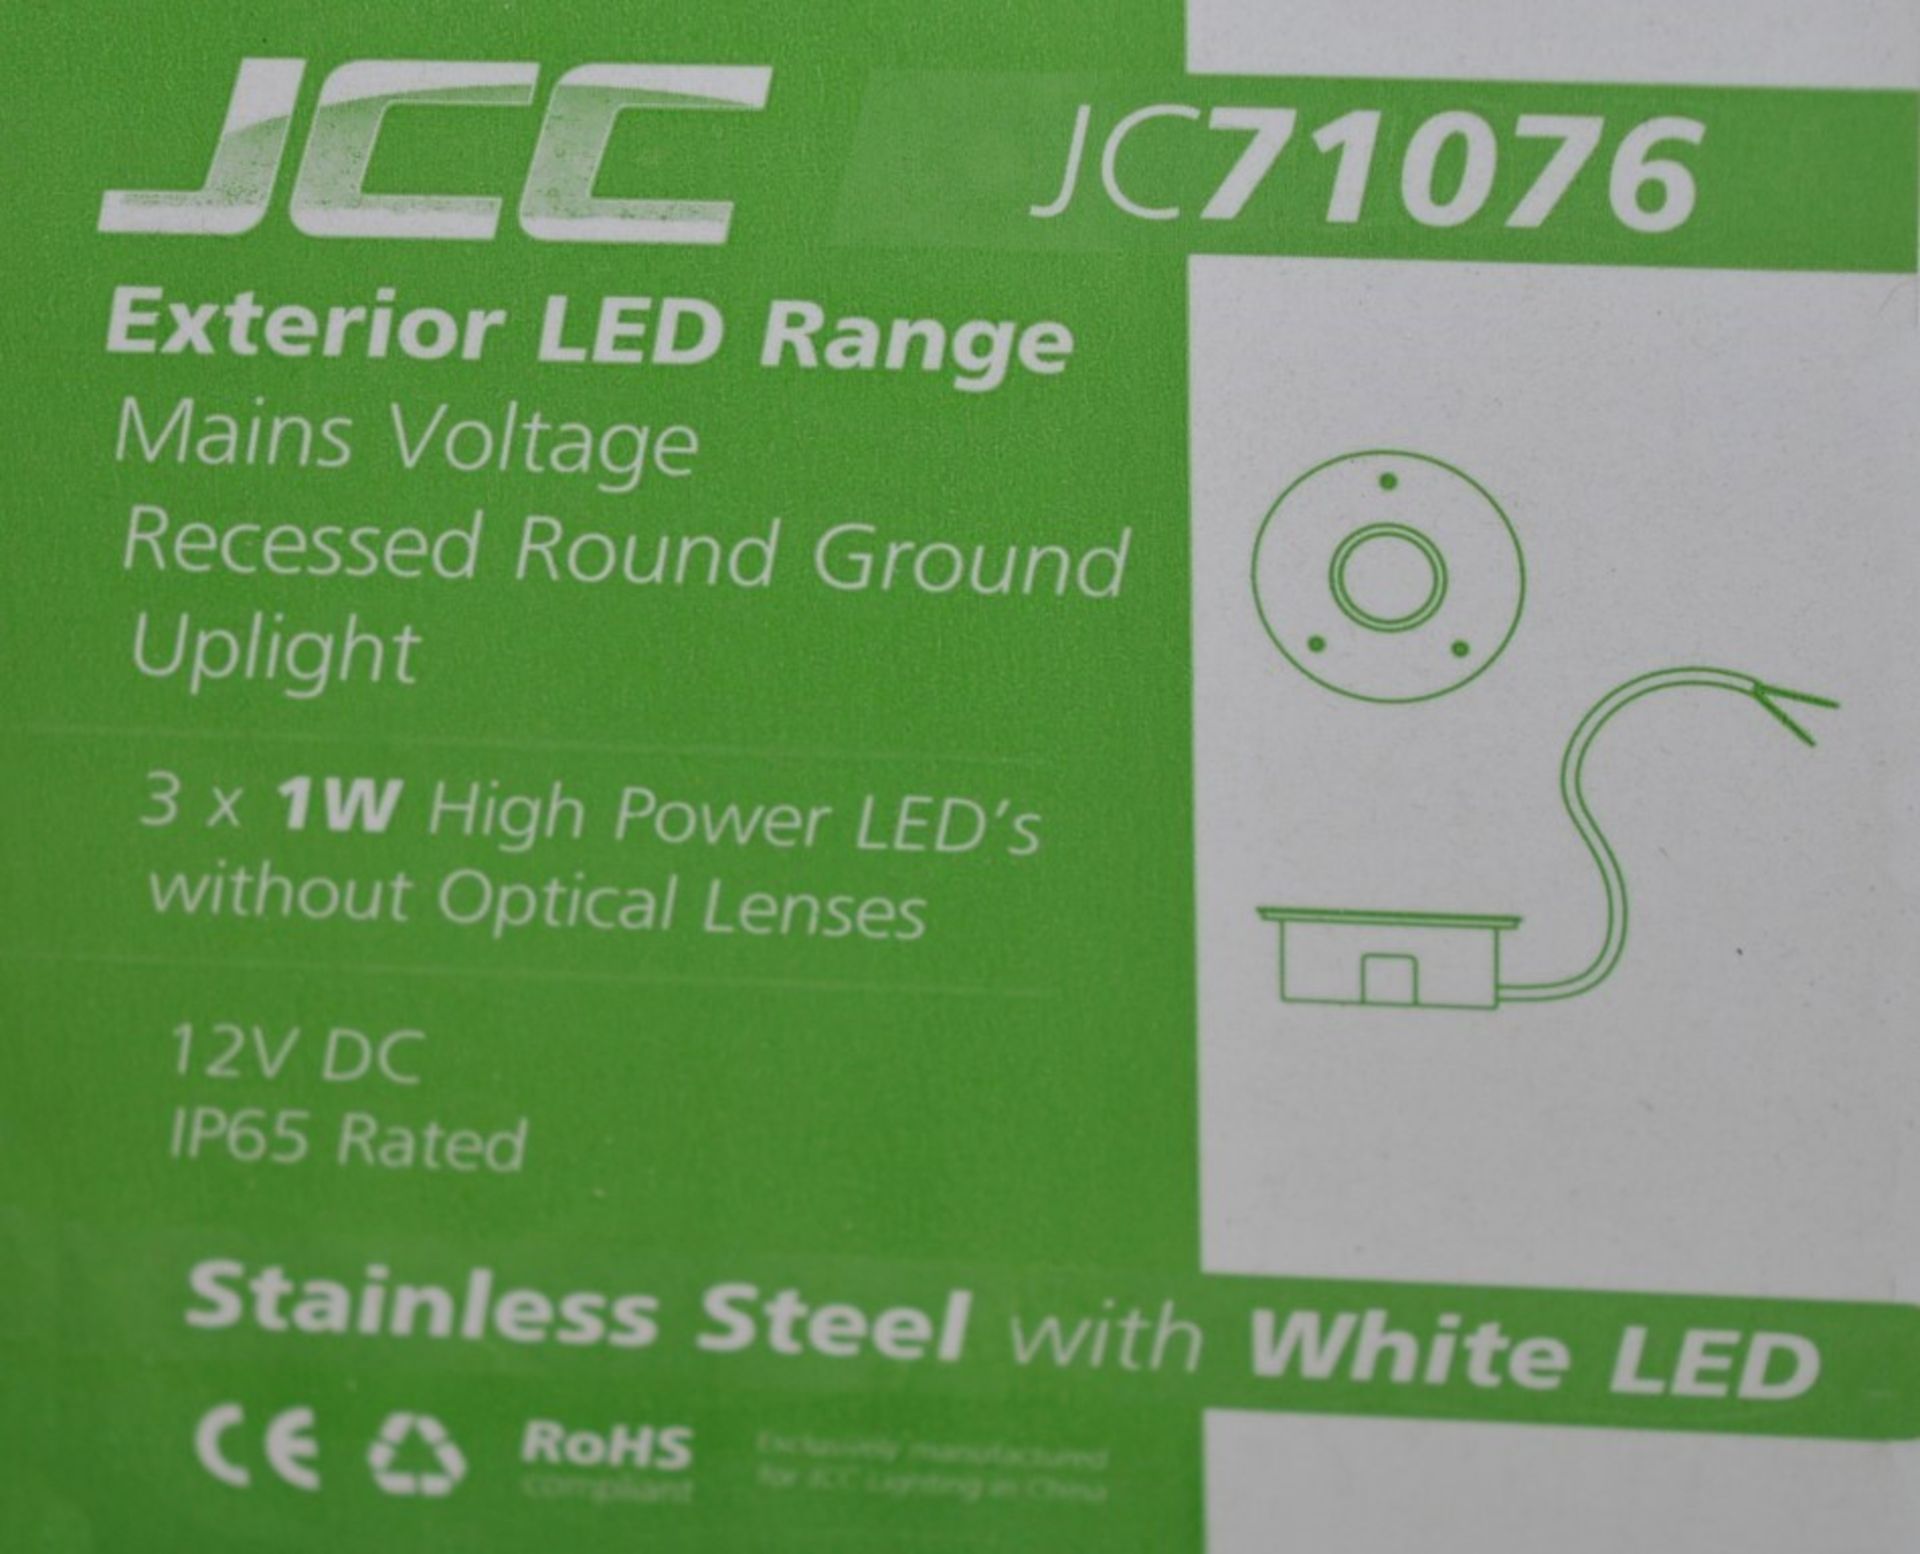 6 x JCC Lighting Exterior LED Mains Voltage Recessed GROUND UPLIGHTS - Ideal For Patios or Decking - - Image 4 of 5